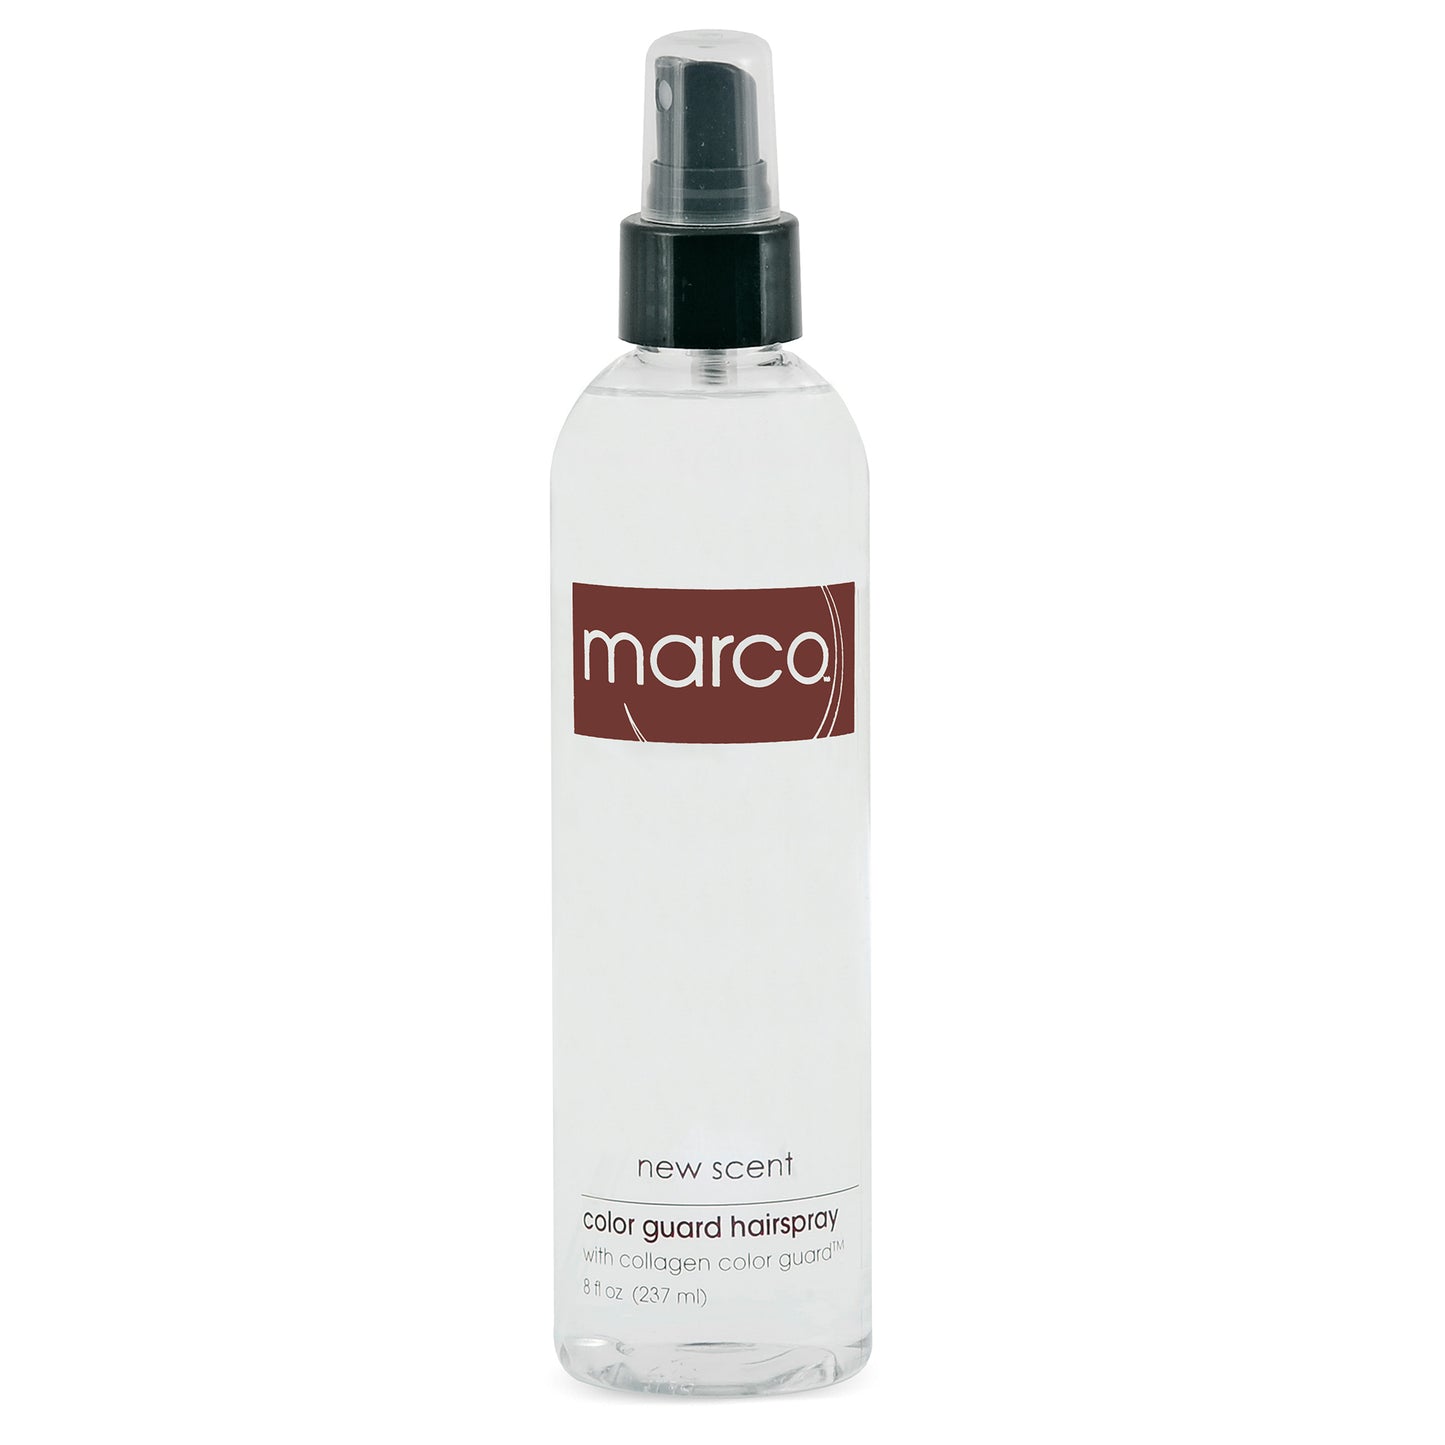 Clear bottle with translucent product, “marco, new scent, color guard hairspray, with collagen color guard”